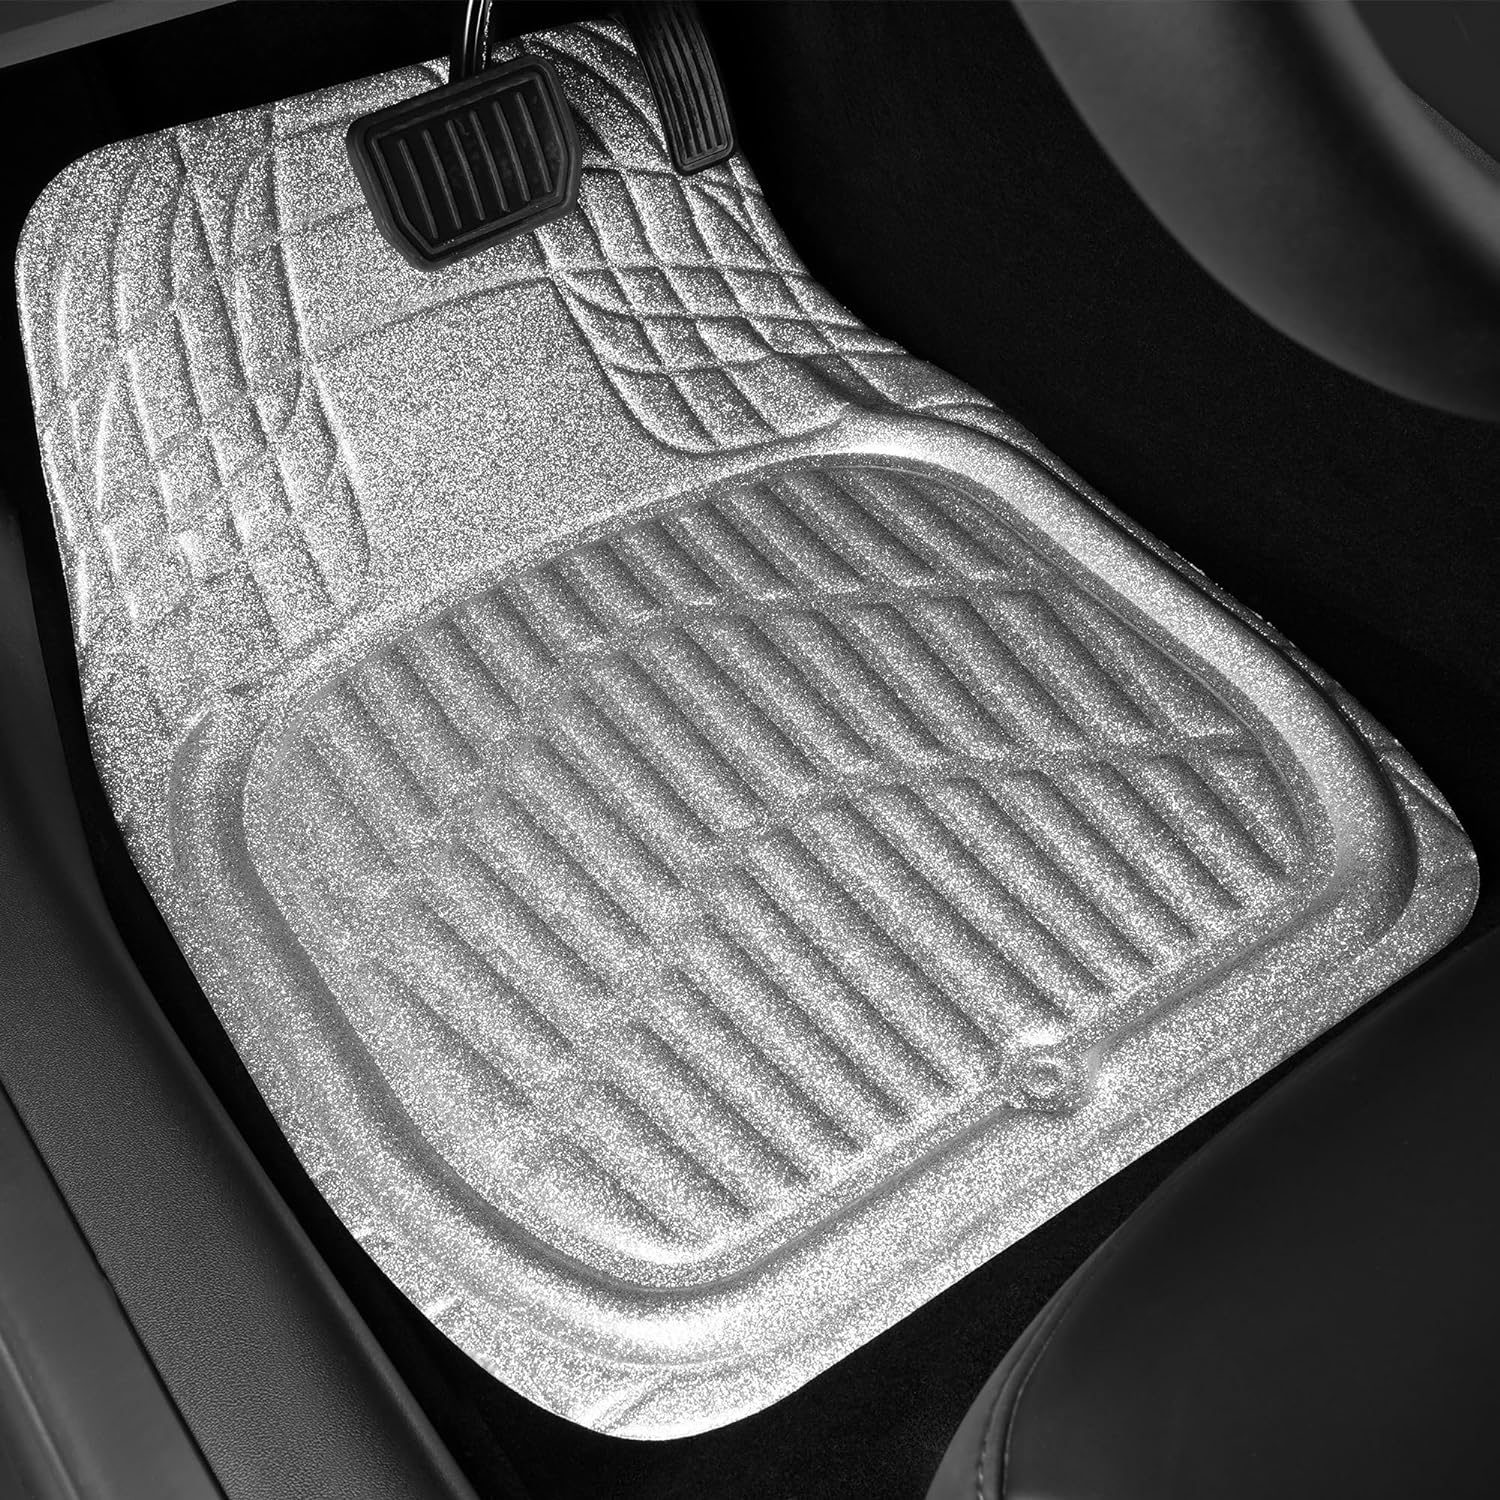 CASS Pass Leather Car Floor Mats -3D Waterproof All Weather, Universal Trim to Fit & Anti-Slip Burr Bottom Safety & Light Easy Clean Install for SUV Truck Auto (Pink) 4 Piece Sedan Van